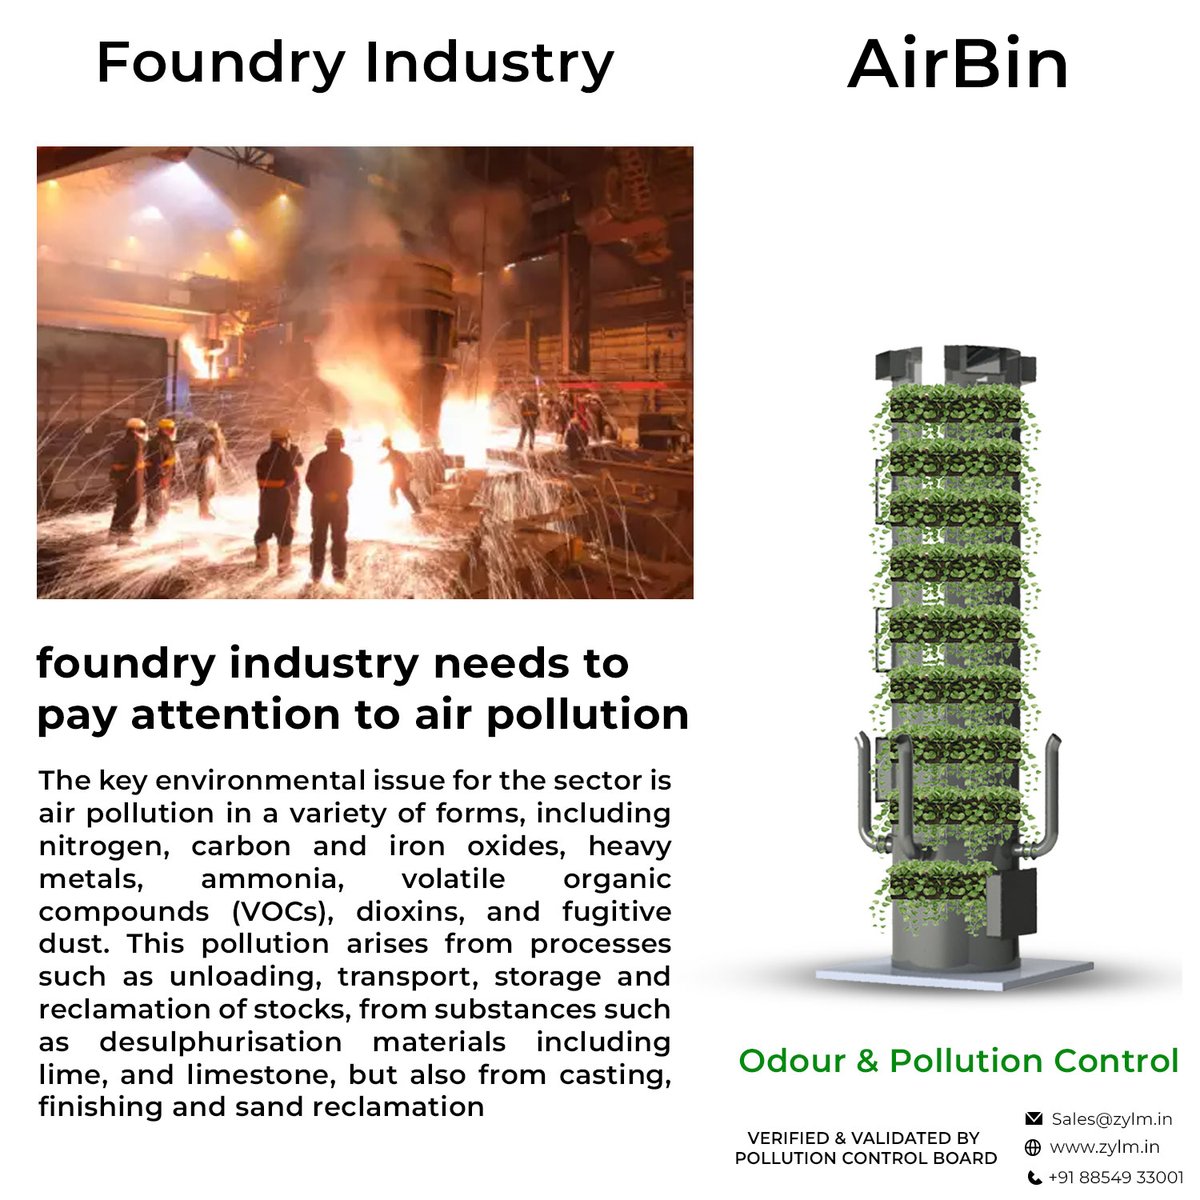 he foundry industry contributes to air pollution through the emission of particulate matter

#AirPollutionAwareness #AirPollution #HealthHazards #ProtectOurHealth #EnvironmentalHealth #zylm #zepl